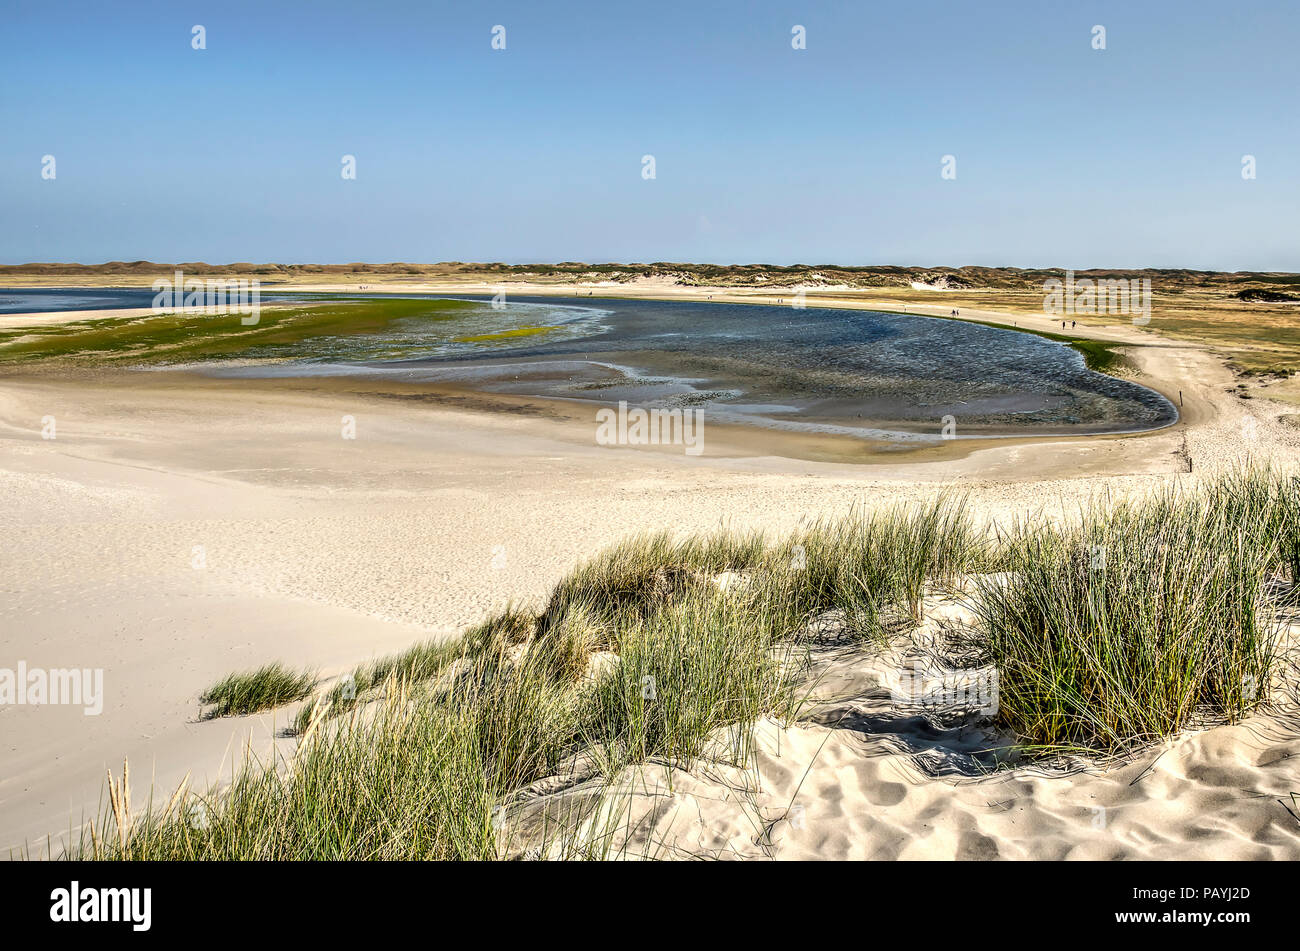 View from a sandy dune with marram grass towards the Slufter nature reserve on the Dutch island of Texel Stock Photo